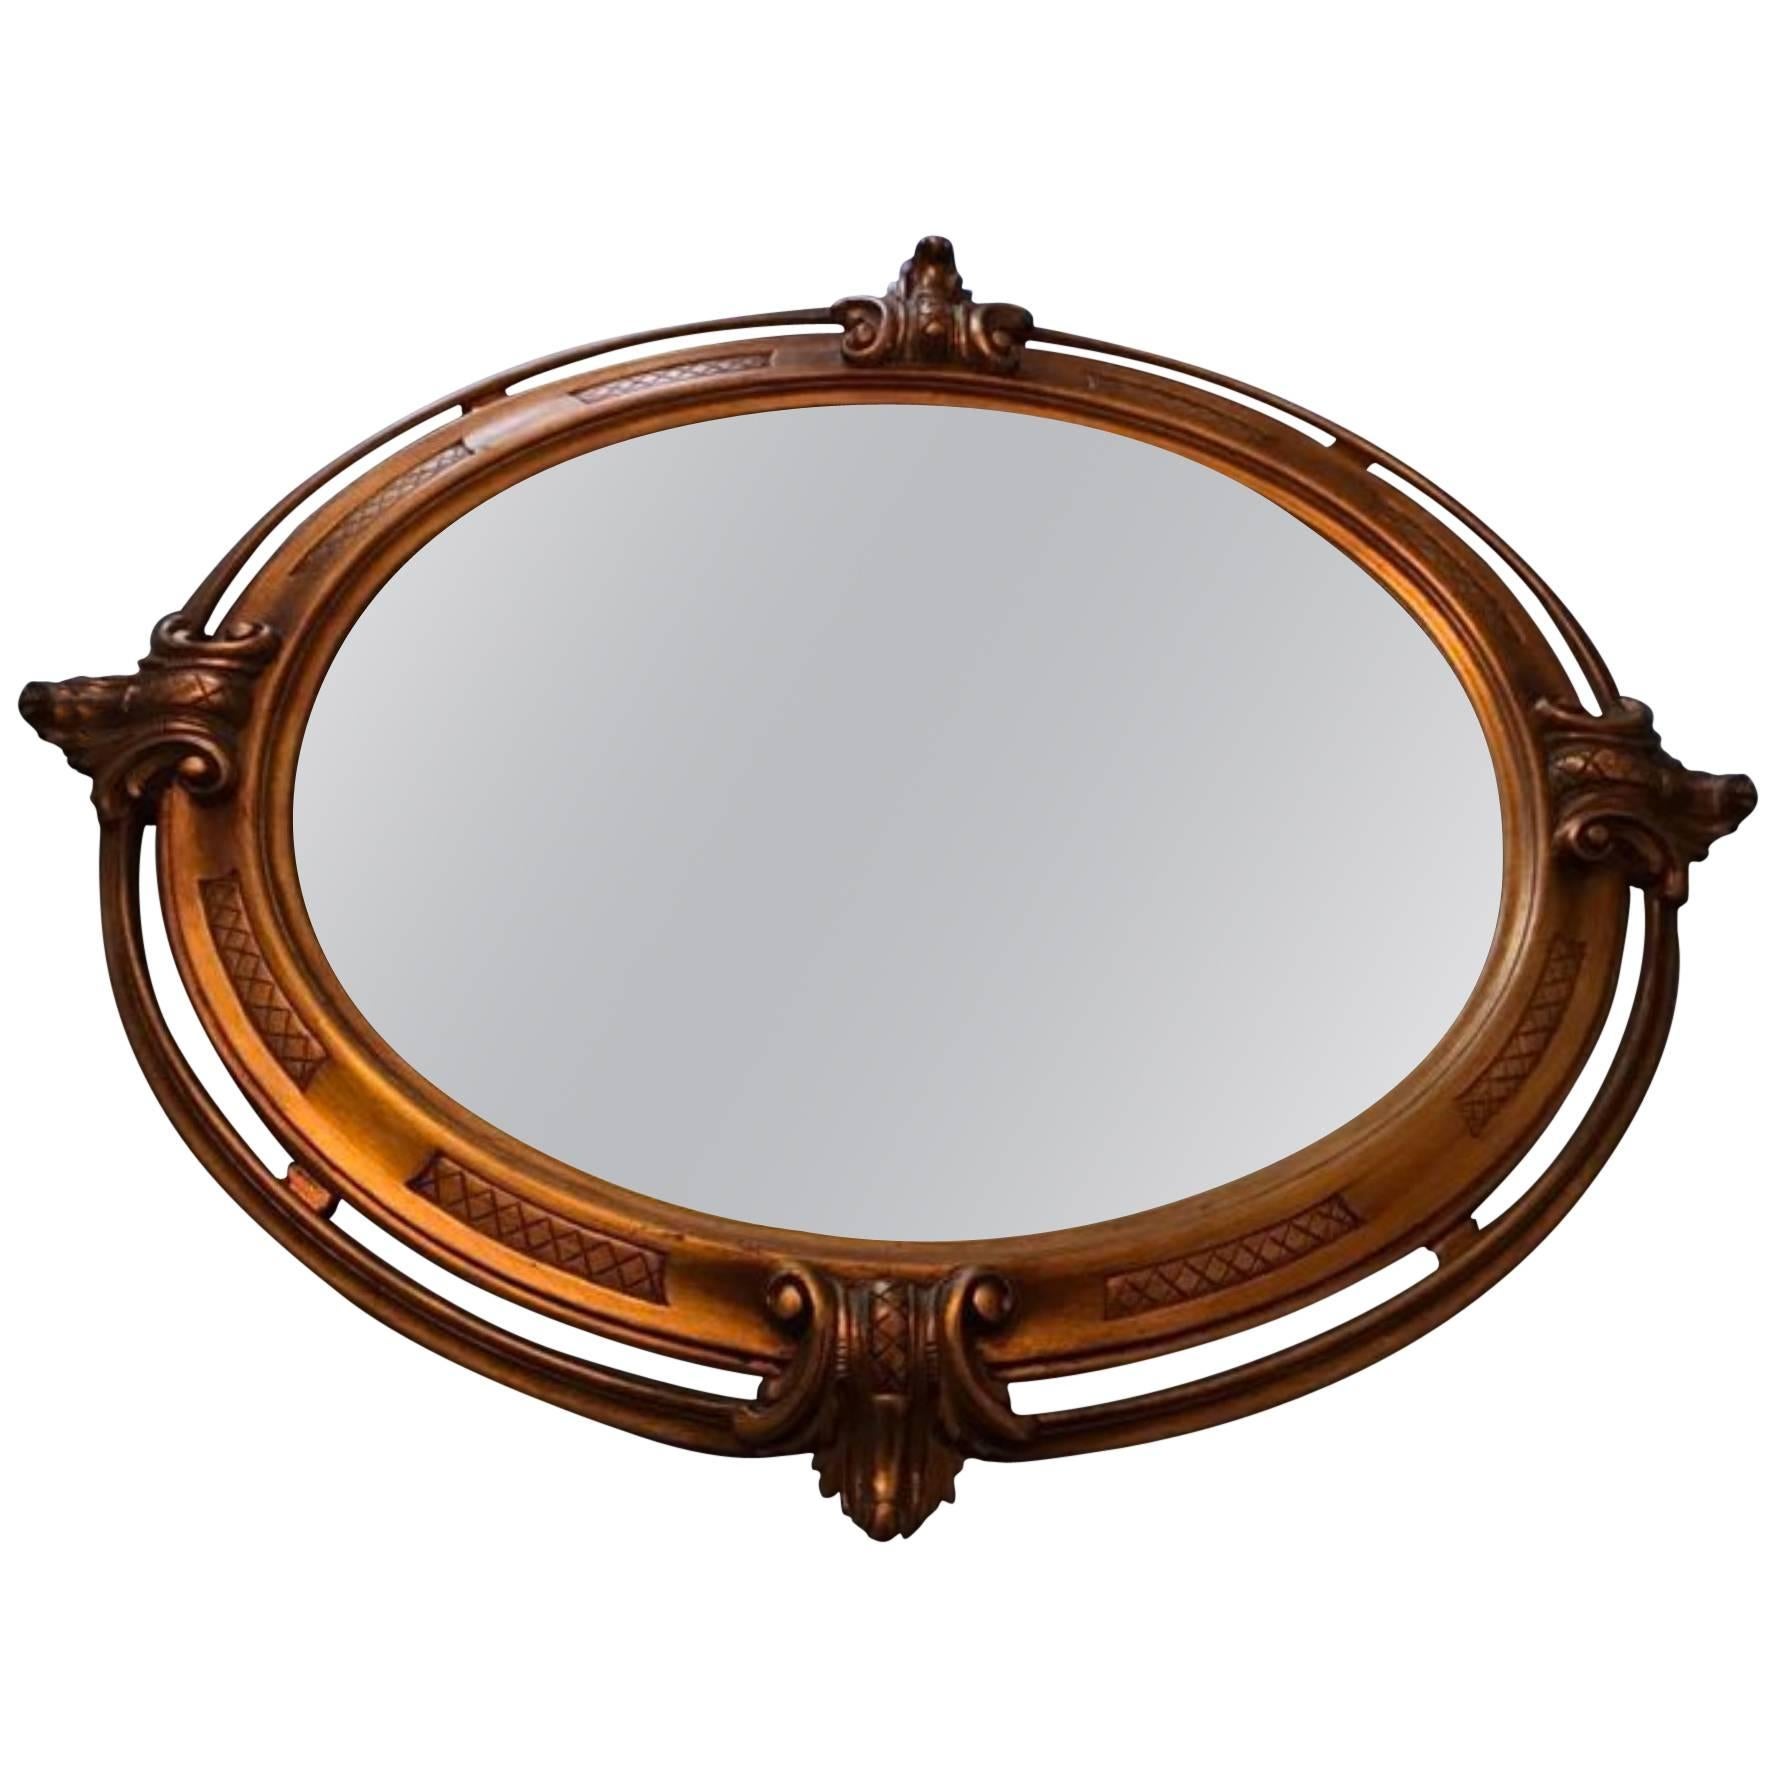 Beautiful Gold-Colored Oval Wood Mirror, Italy For Sale